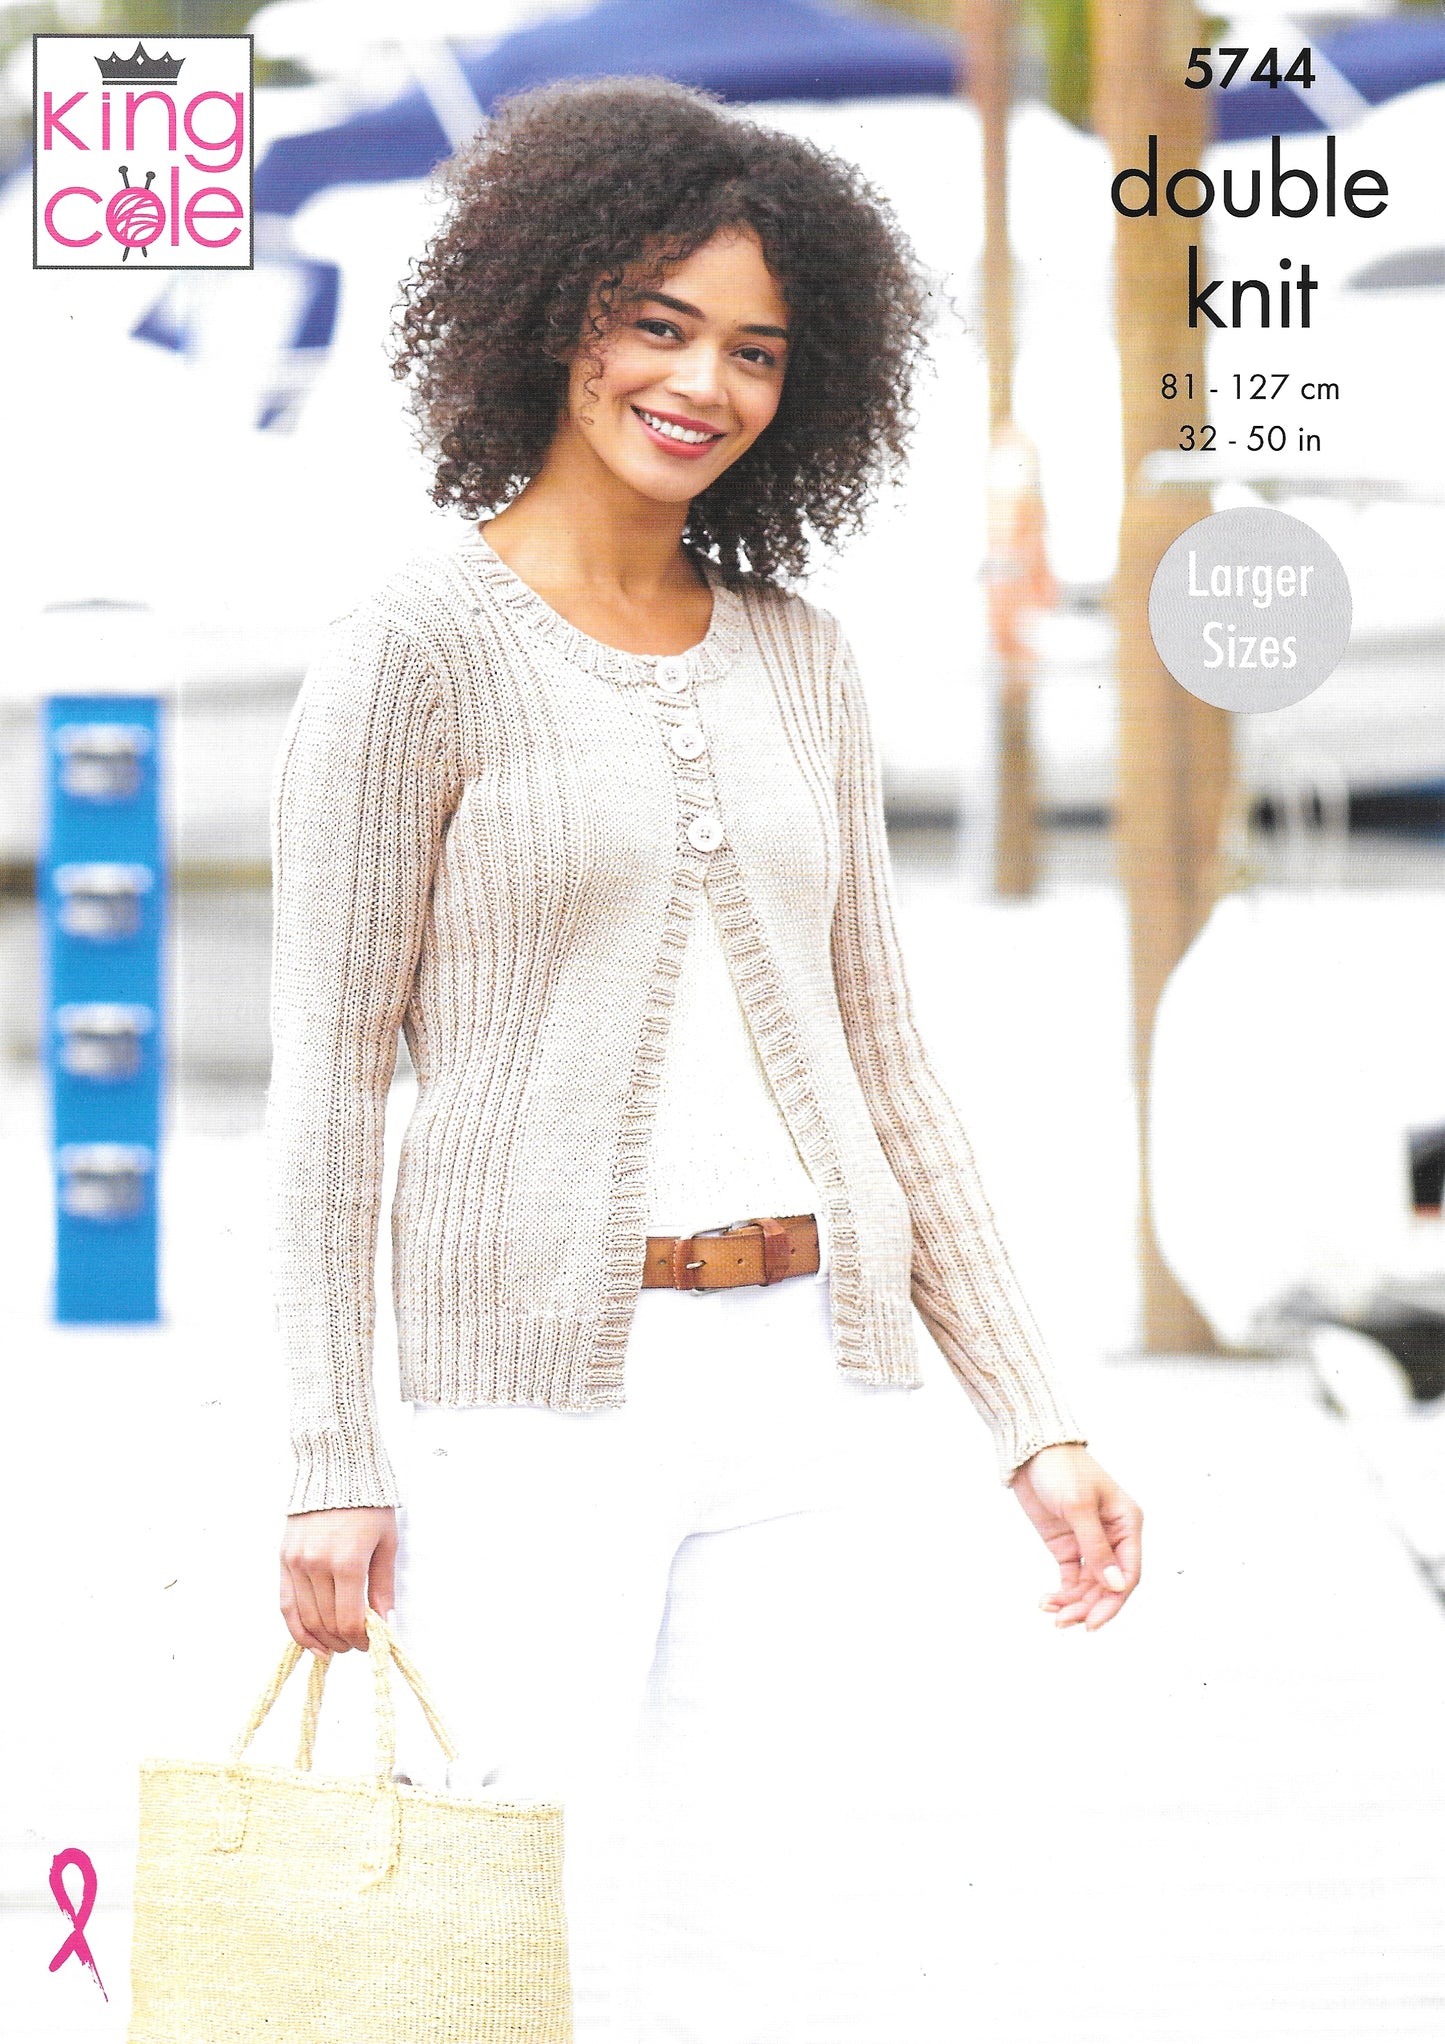 5744 King Cole knitting pattern. Lady's cardigan and summer top. DK